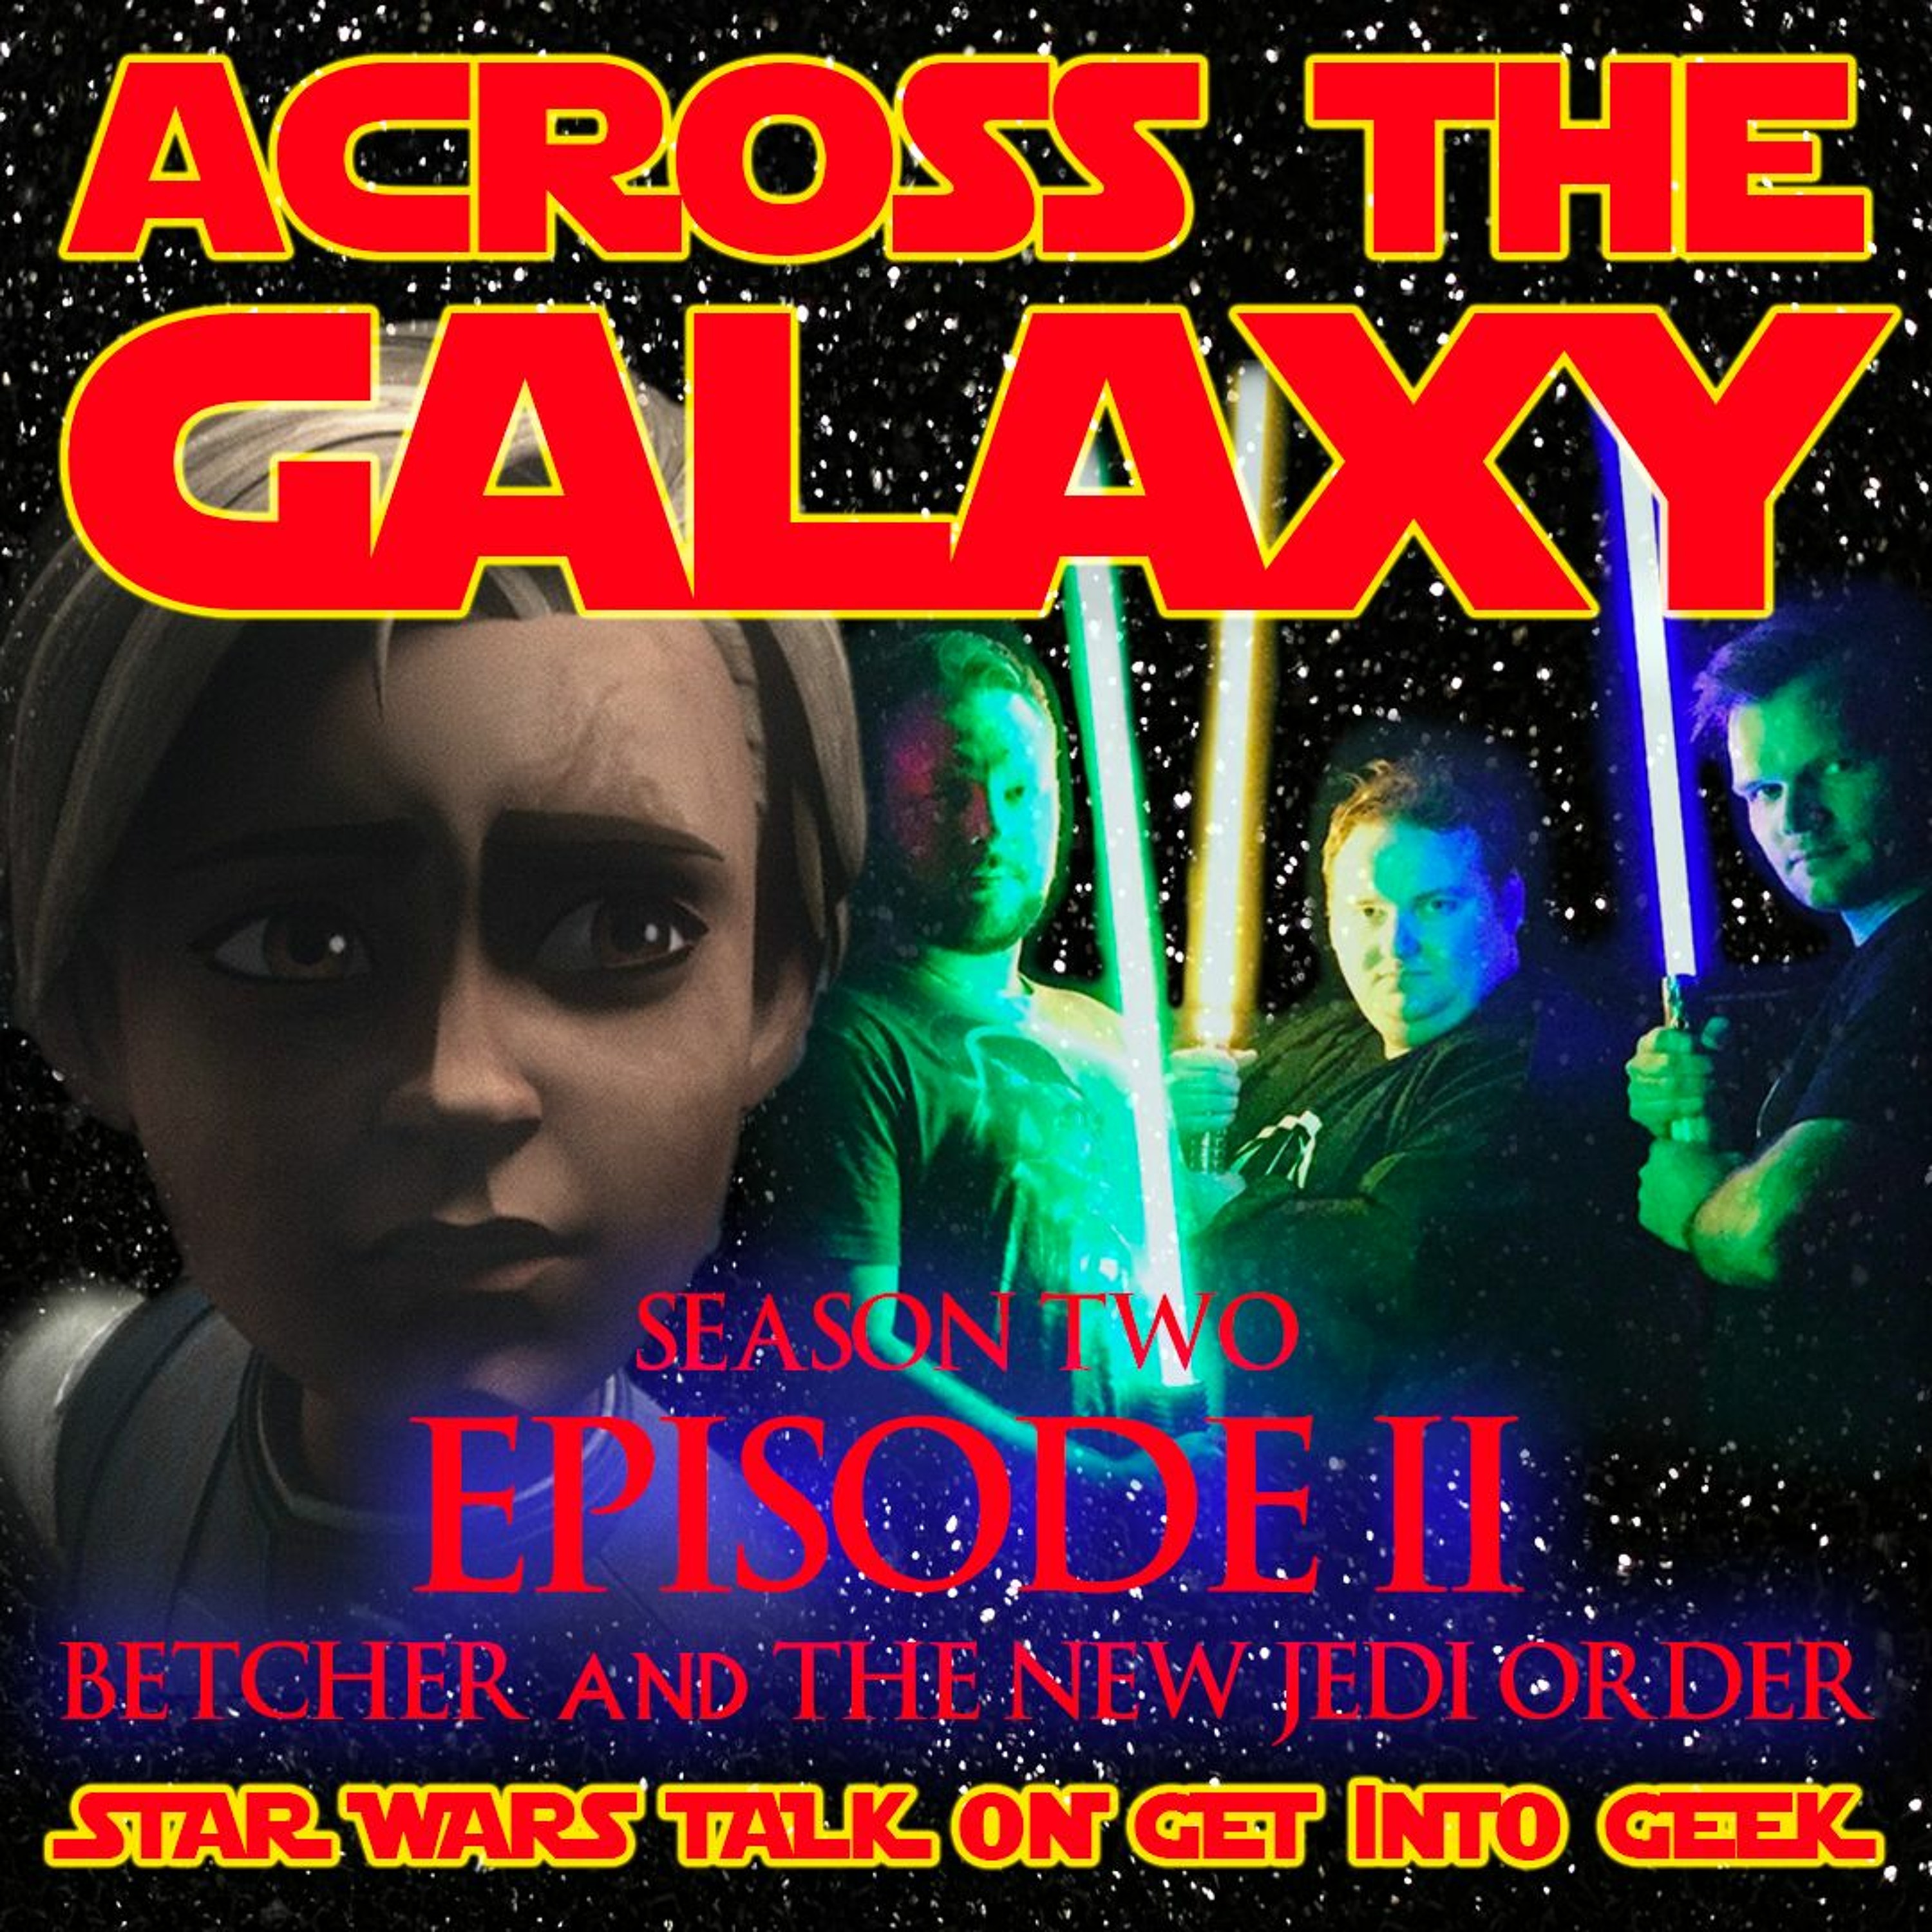 Betcher and The New Jedi Order (Across The Galaxy - Episode 2.02)